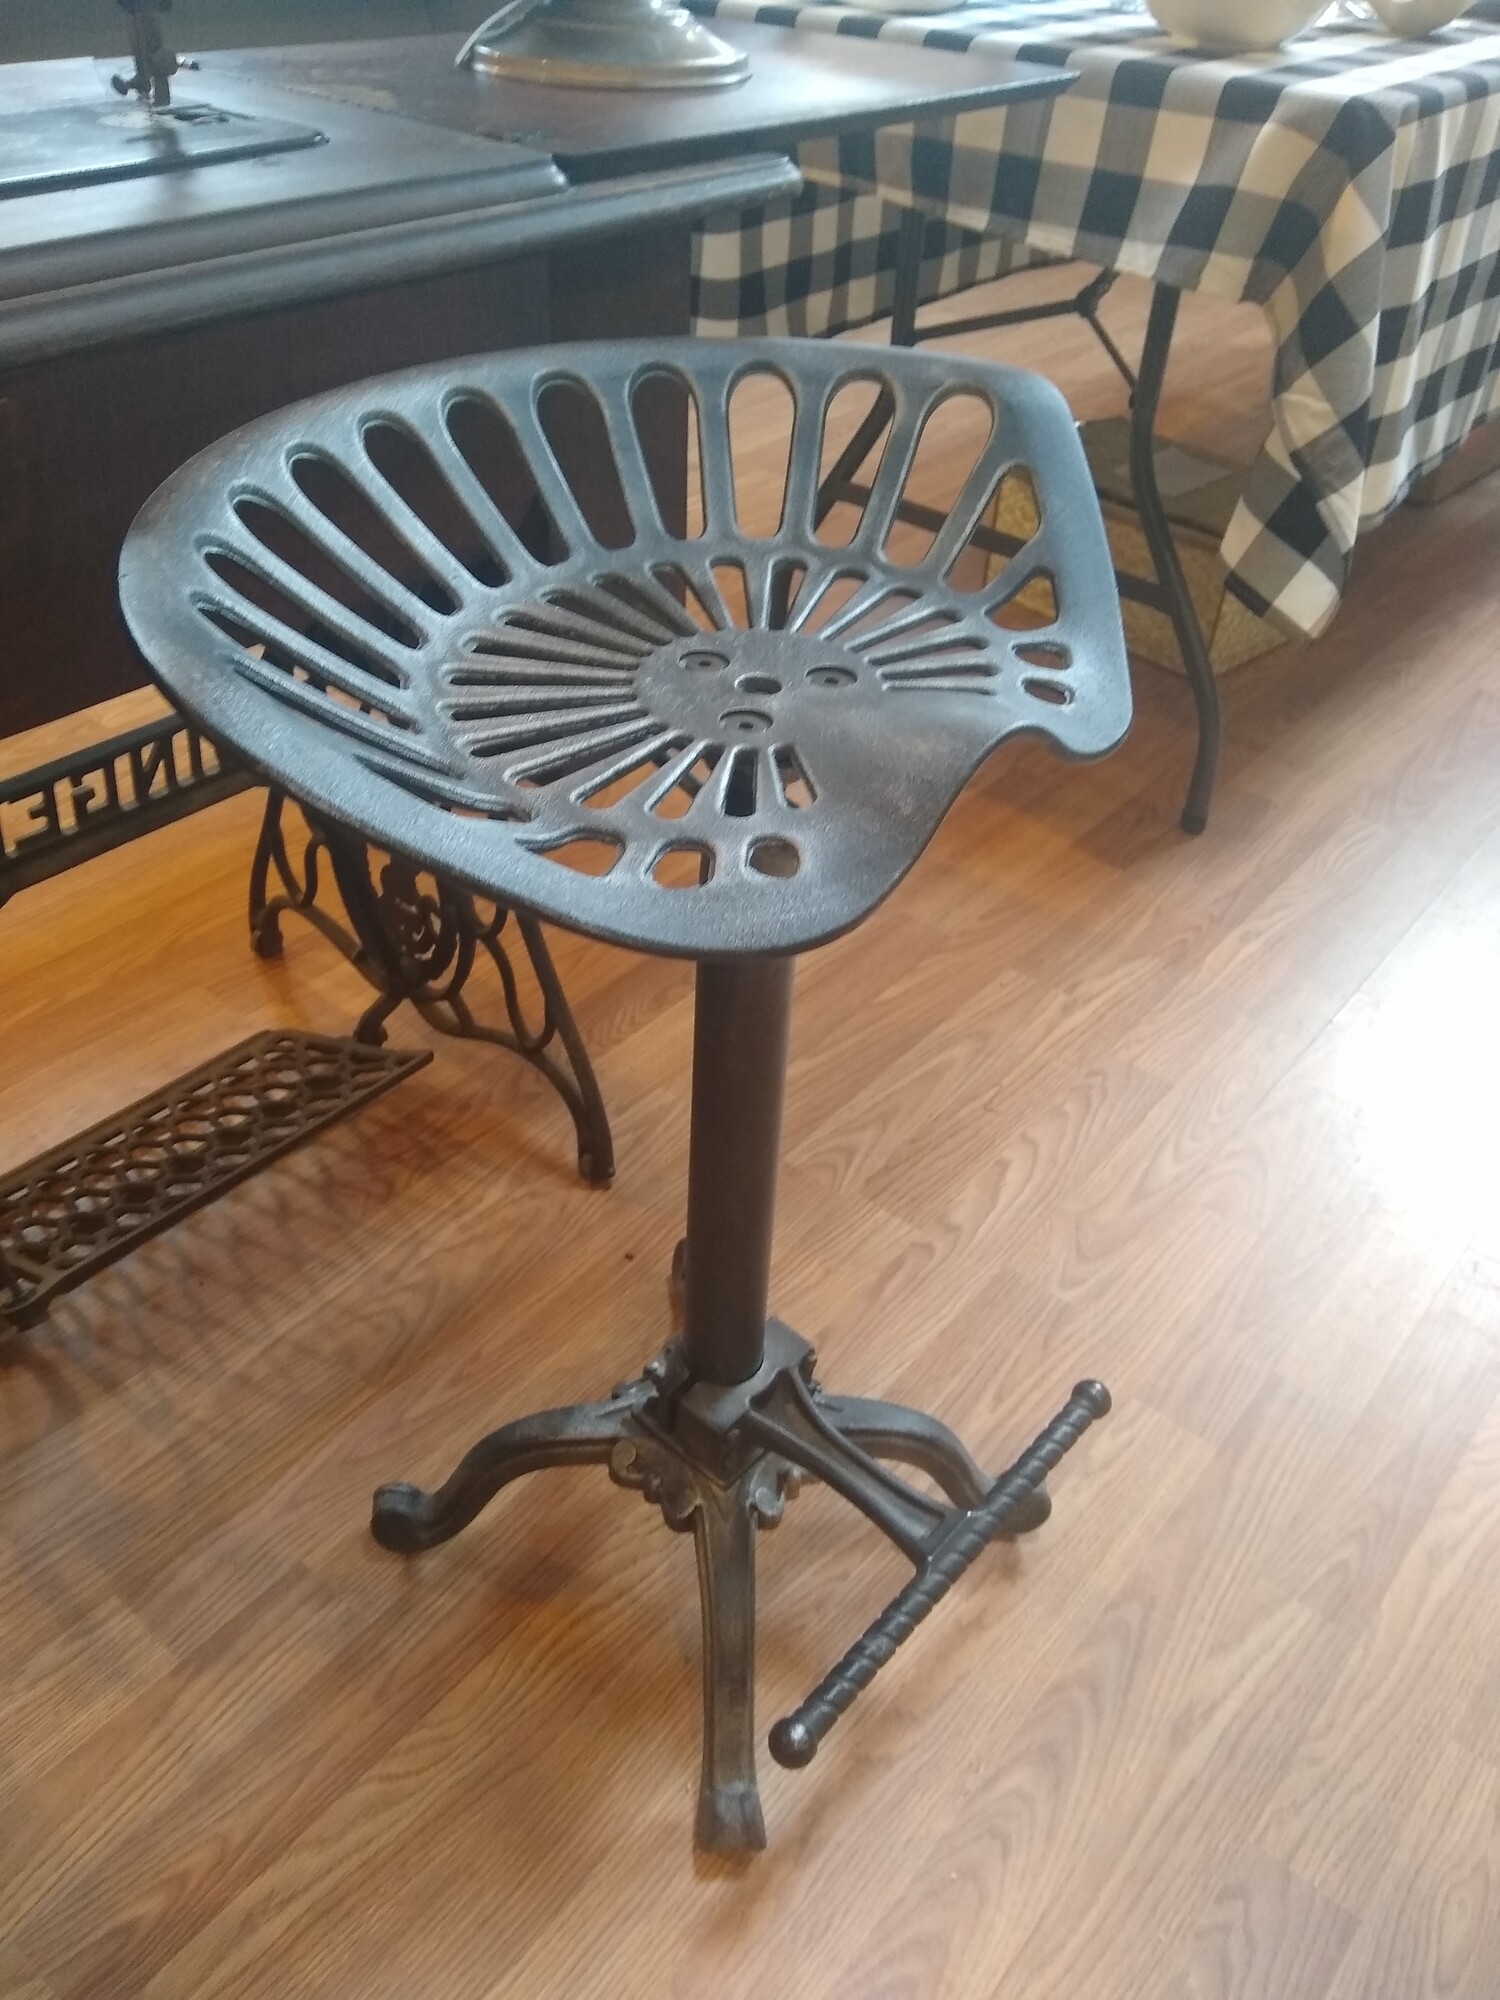 Tractor Seat Metal Stool

Very unique metal tractor seat stool.  Seat is adjustable for height.

Size: 20 in wide X 14 in deep X 27 in high